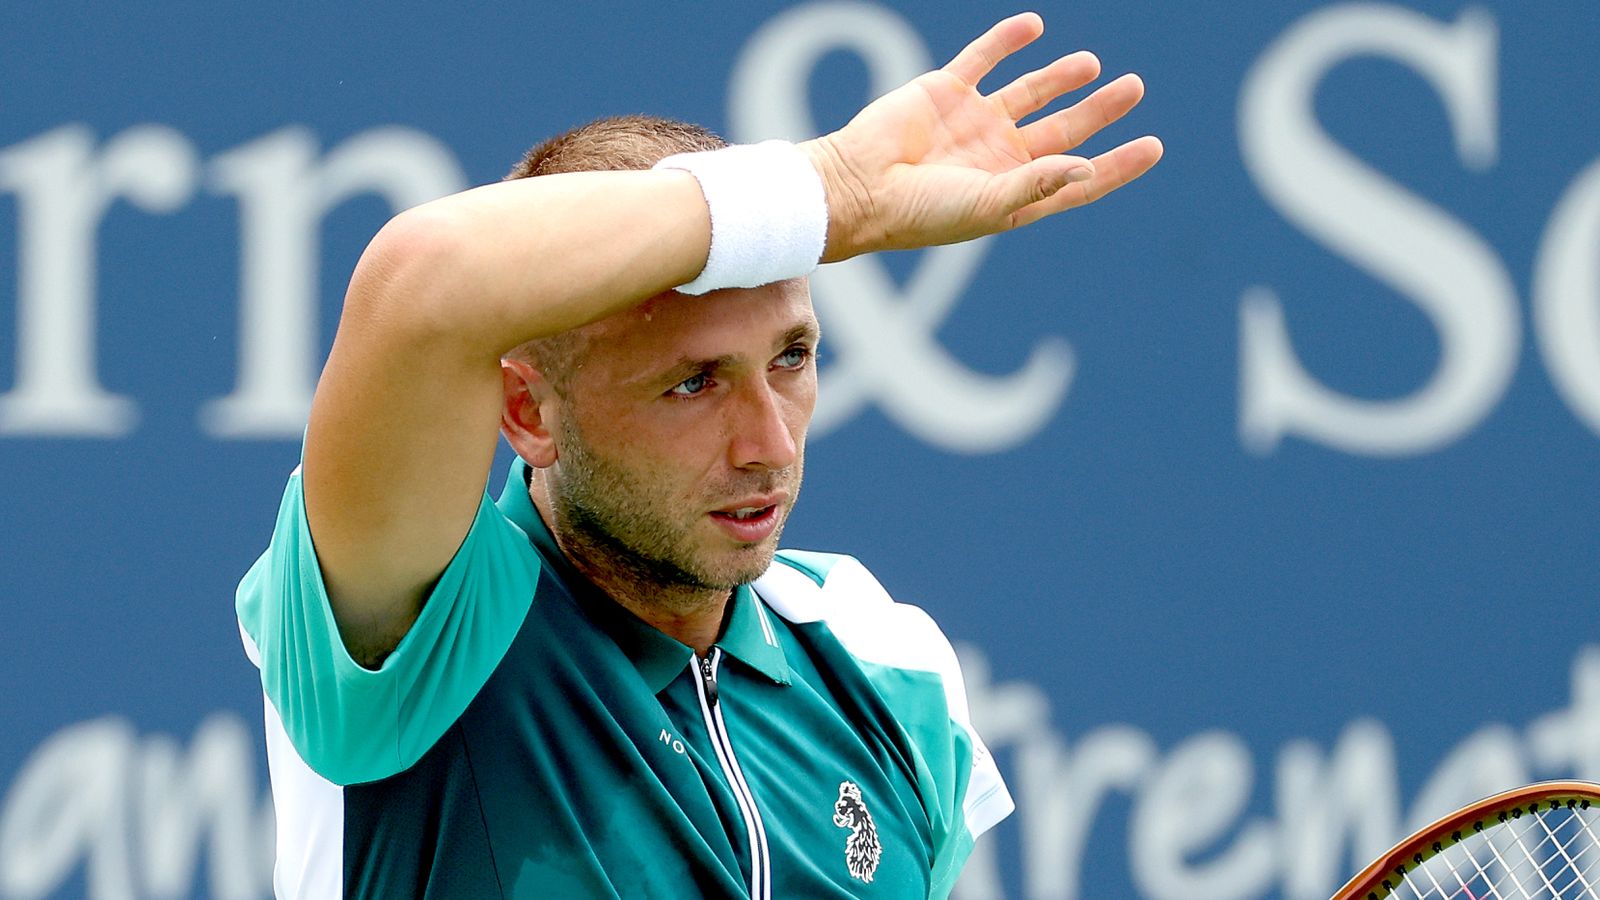 Great Britain's Dan Evans and Cameron Norrie knocked out in first round of Cincinnati Open | Tennis News